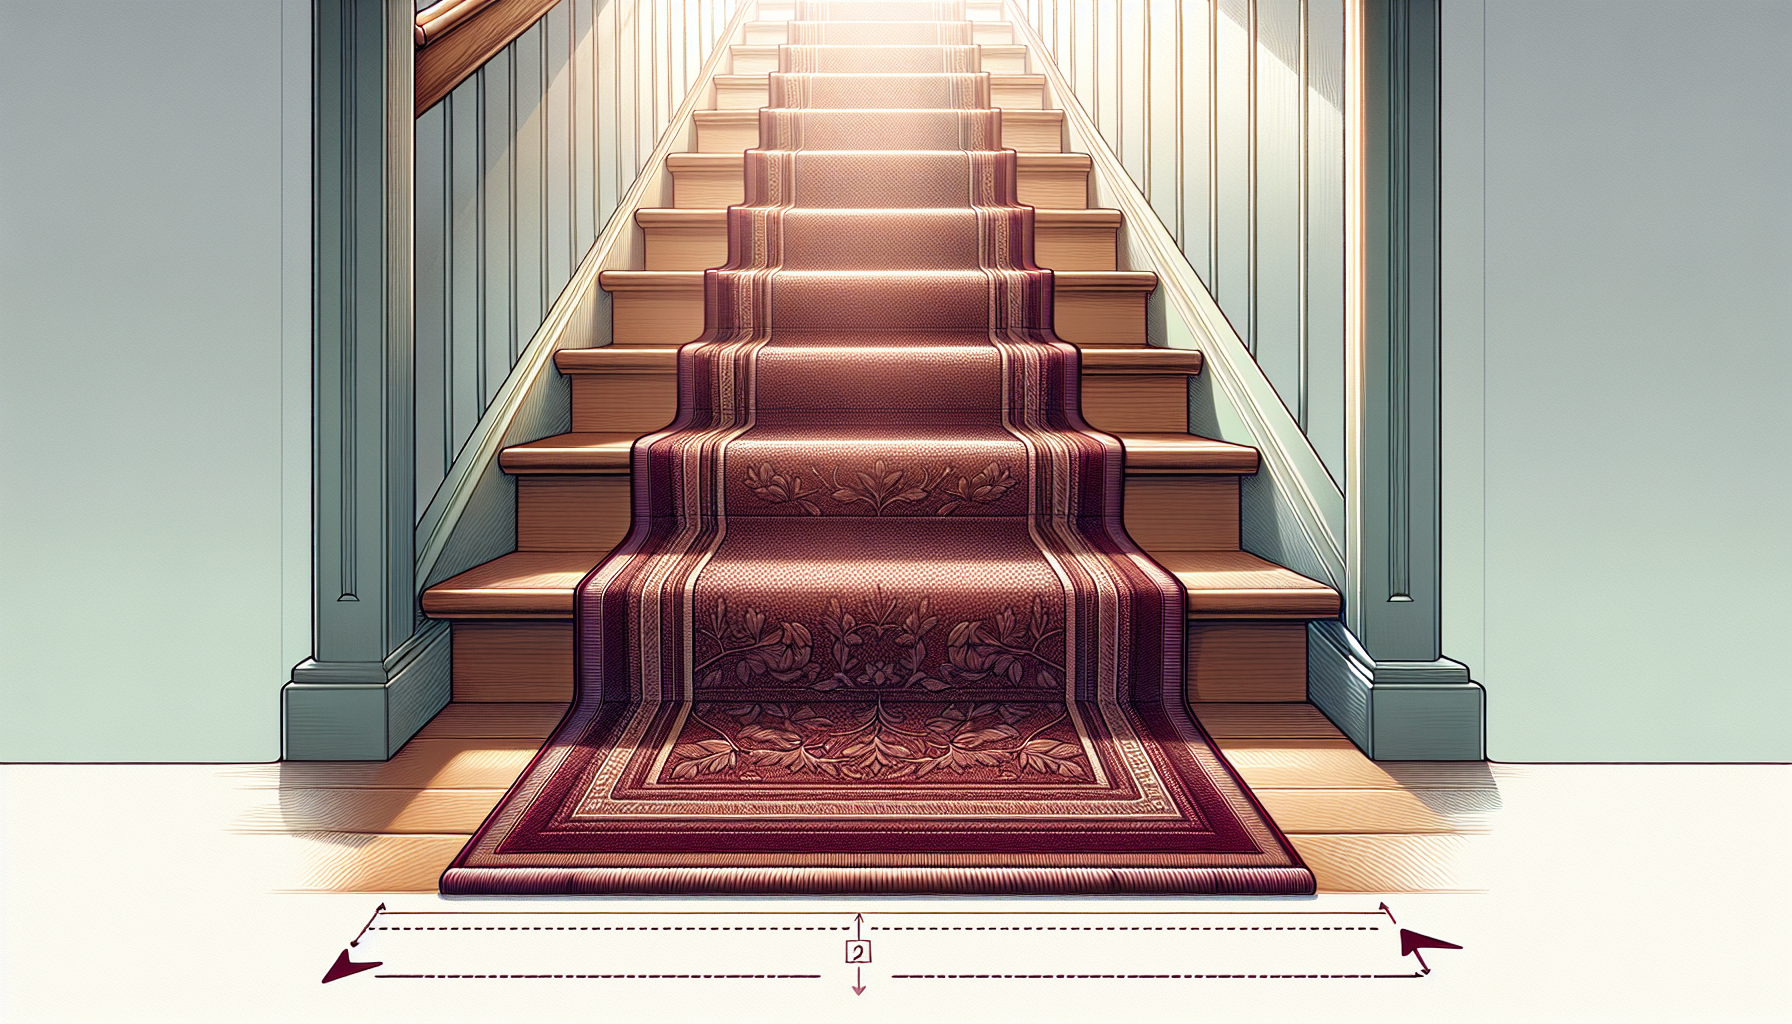 Illustration of a straight staircase with a stair runner